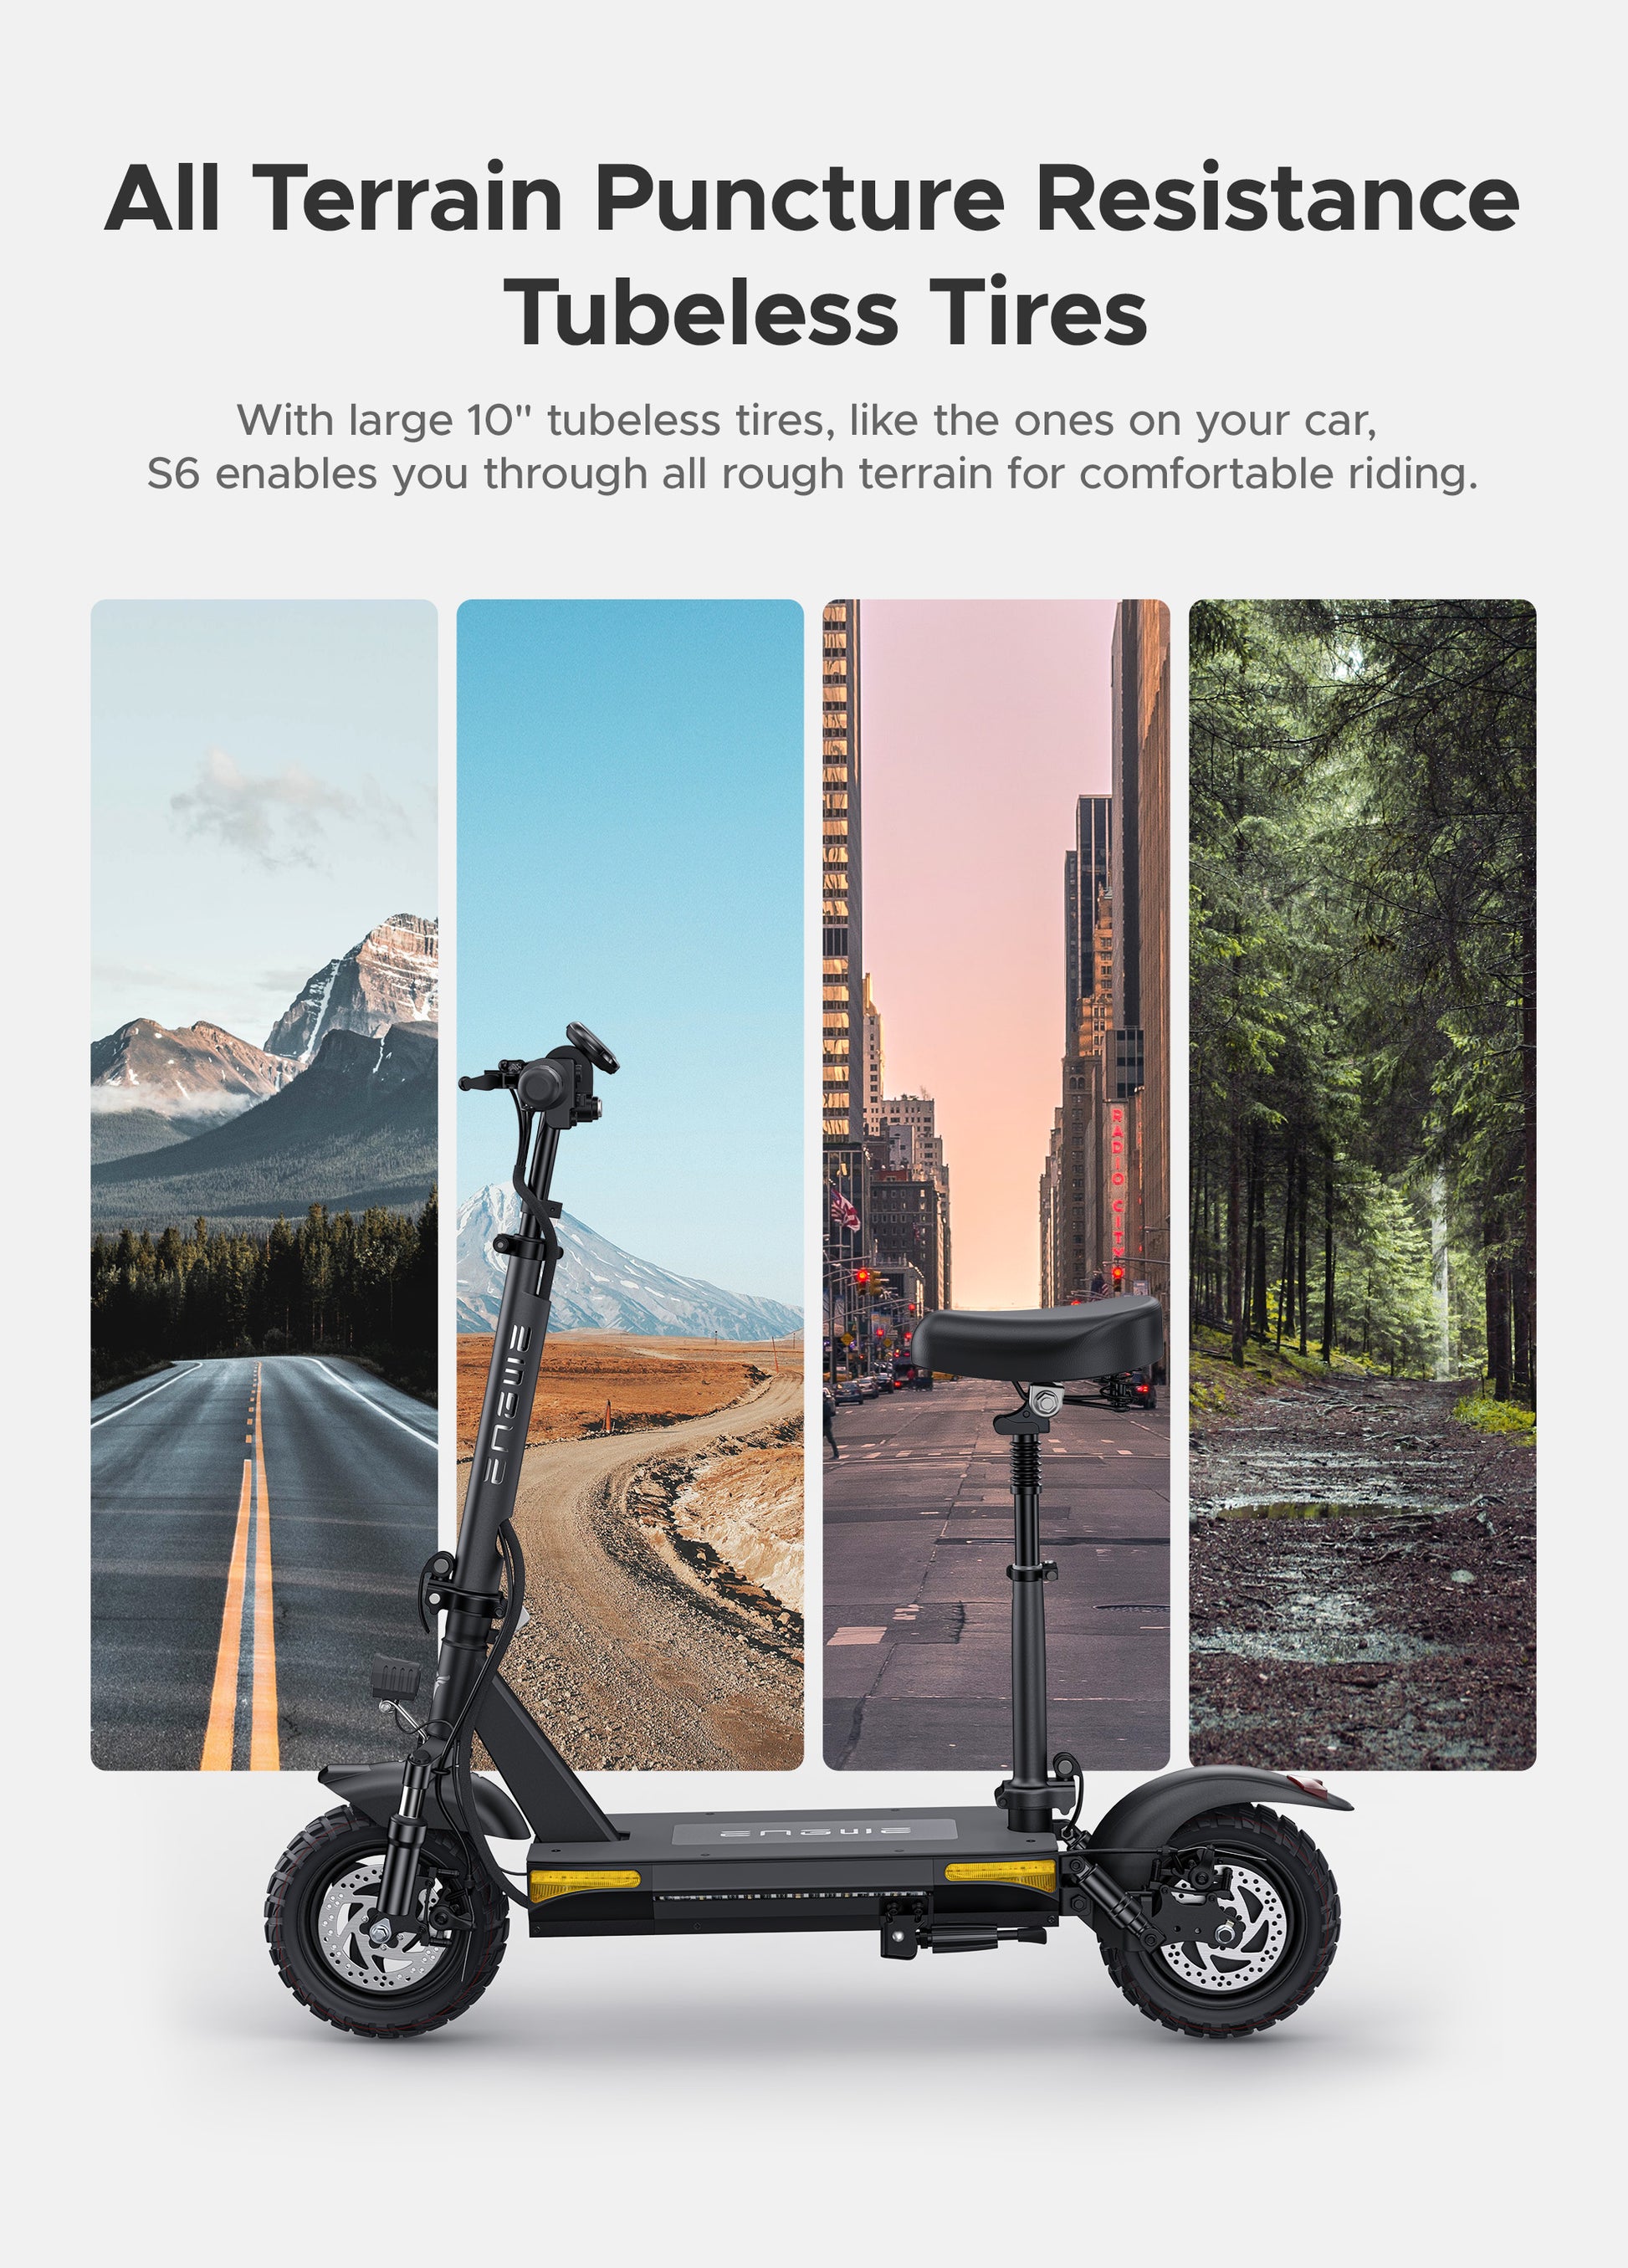 Engwe S6 showcasing its all-terrain tubeless tires for various outdoor conditions.